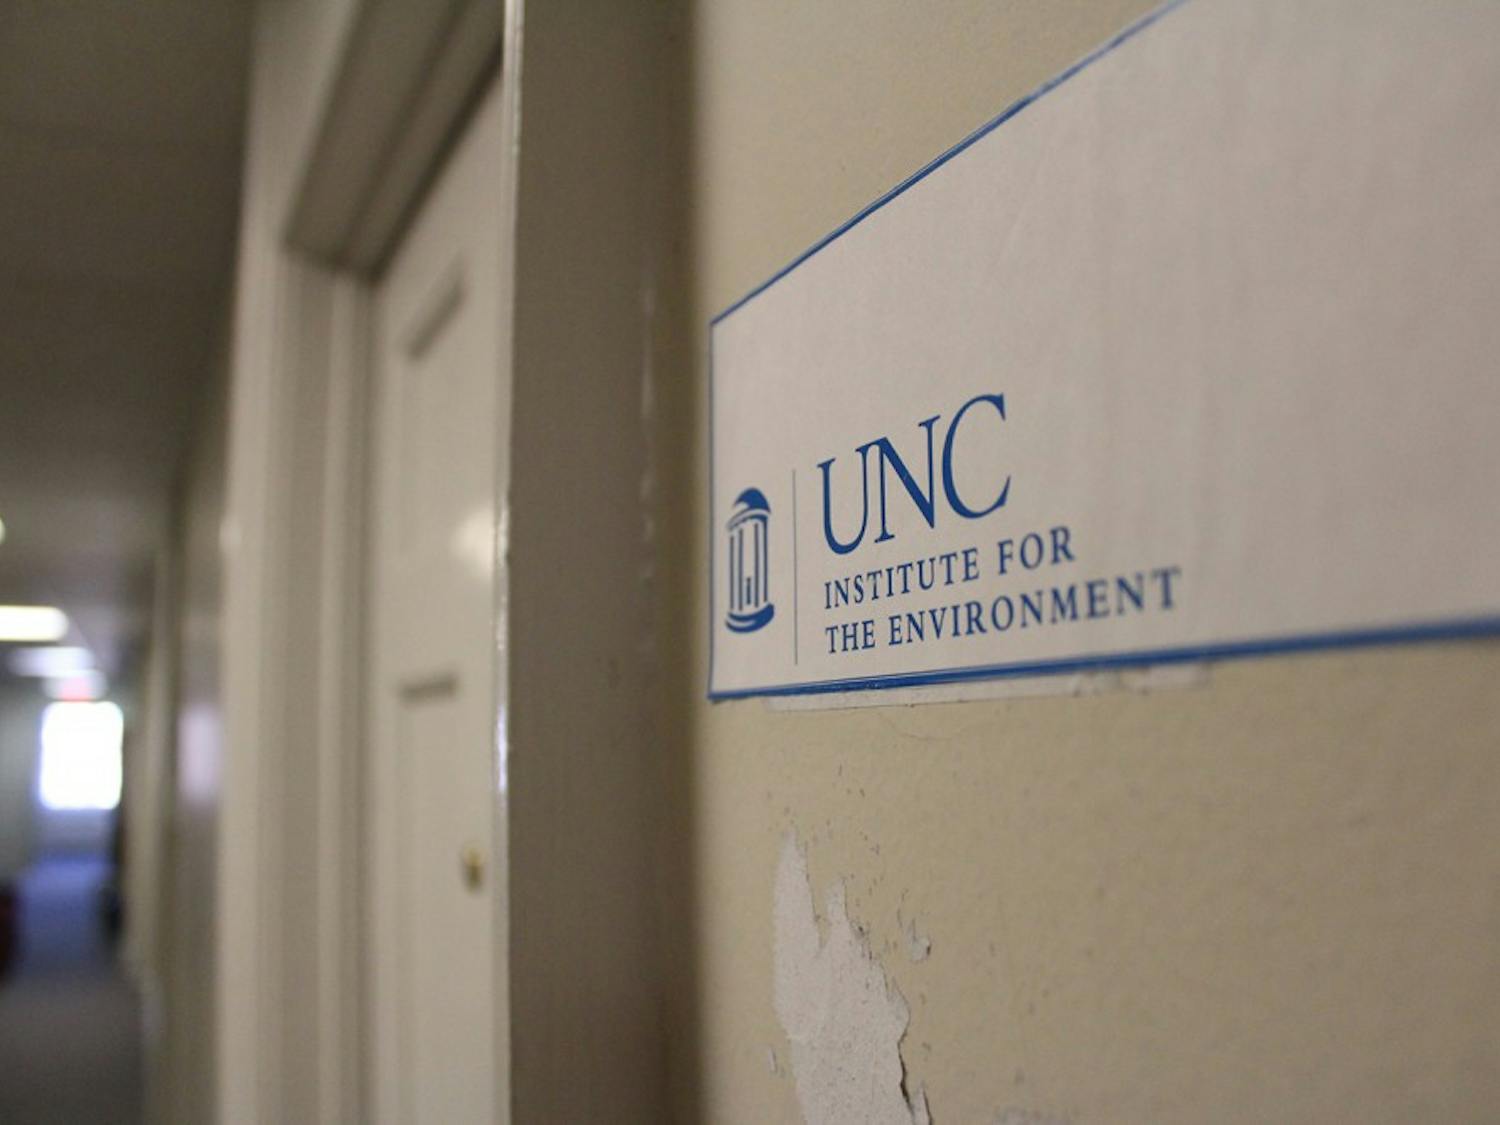 A $1 million gift to the UNC Institute for the Environment will be used to endow the Pavel Molchanov Scholars Program, which matches students with professional summer internships in environmental science careers.